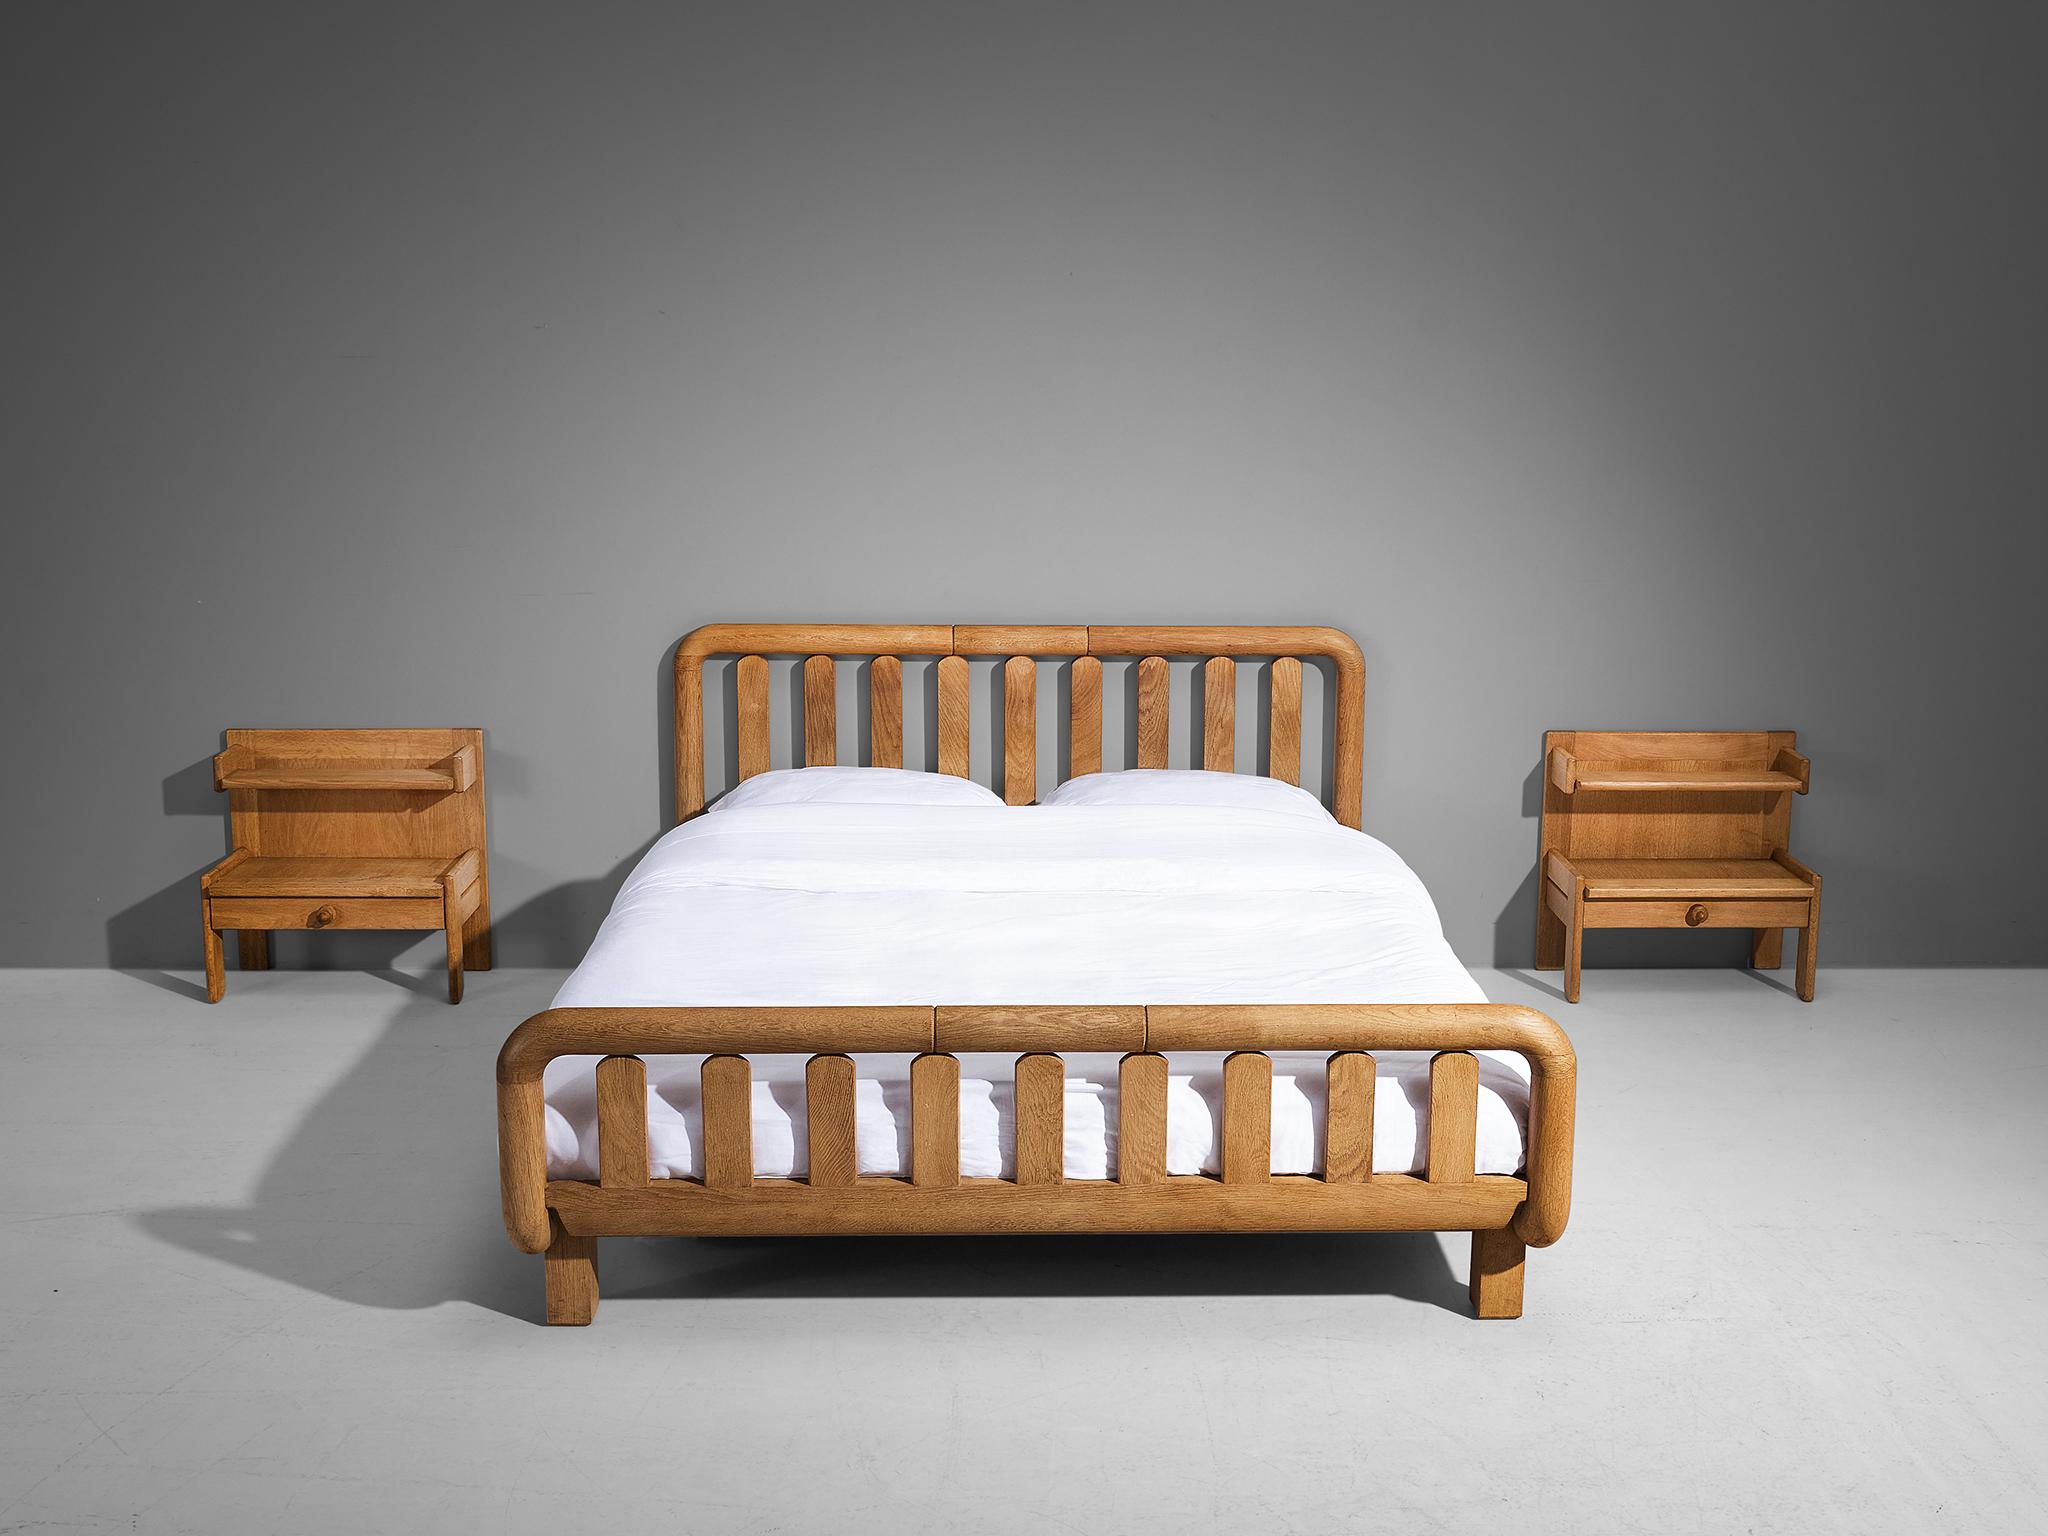 Guillerme et Chambron, double bed, oak, France, 1960s

This bed's main feature is obvious: It's all about the wood work. The excellent crafted frame executed in solid oak has stunning geometrical detailing on the slats, which gives it a very